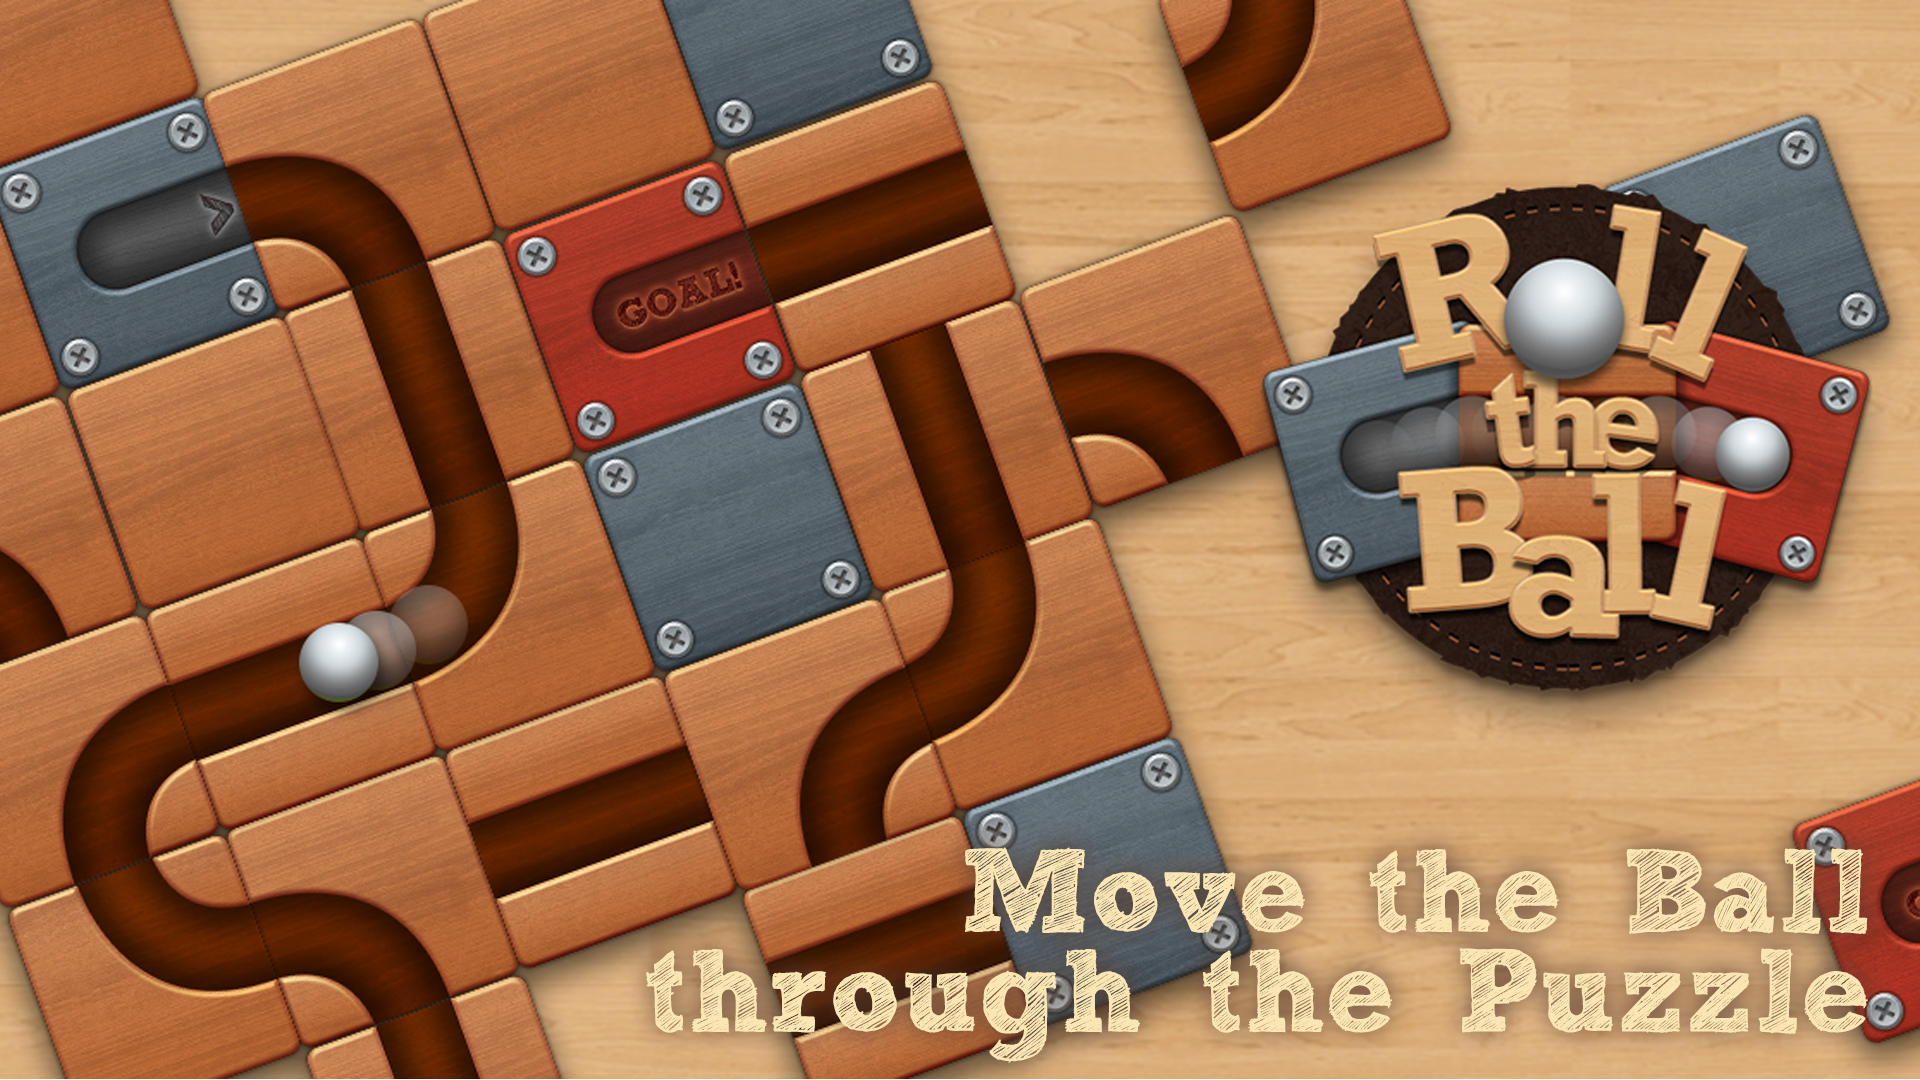 Screenshot 1 of Roll the Ball - slide puzzle 24.0326.00